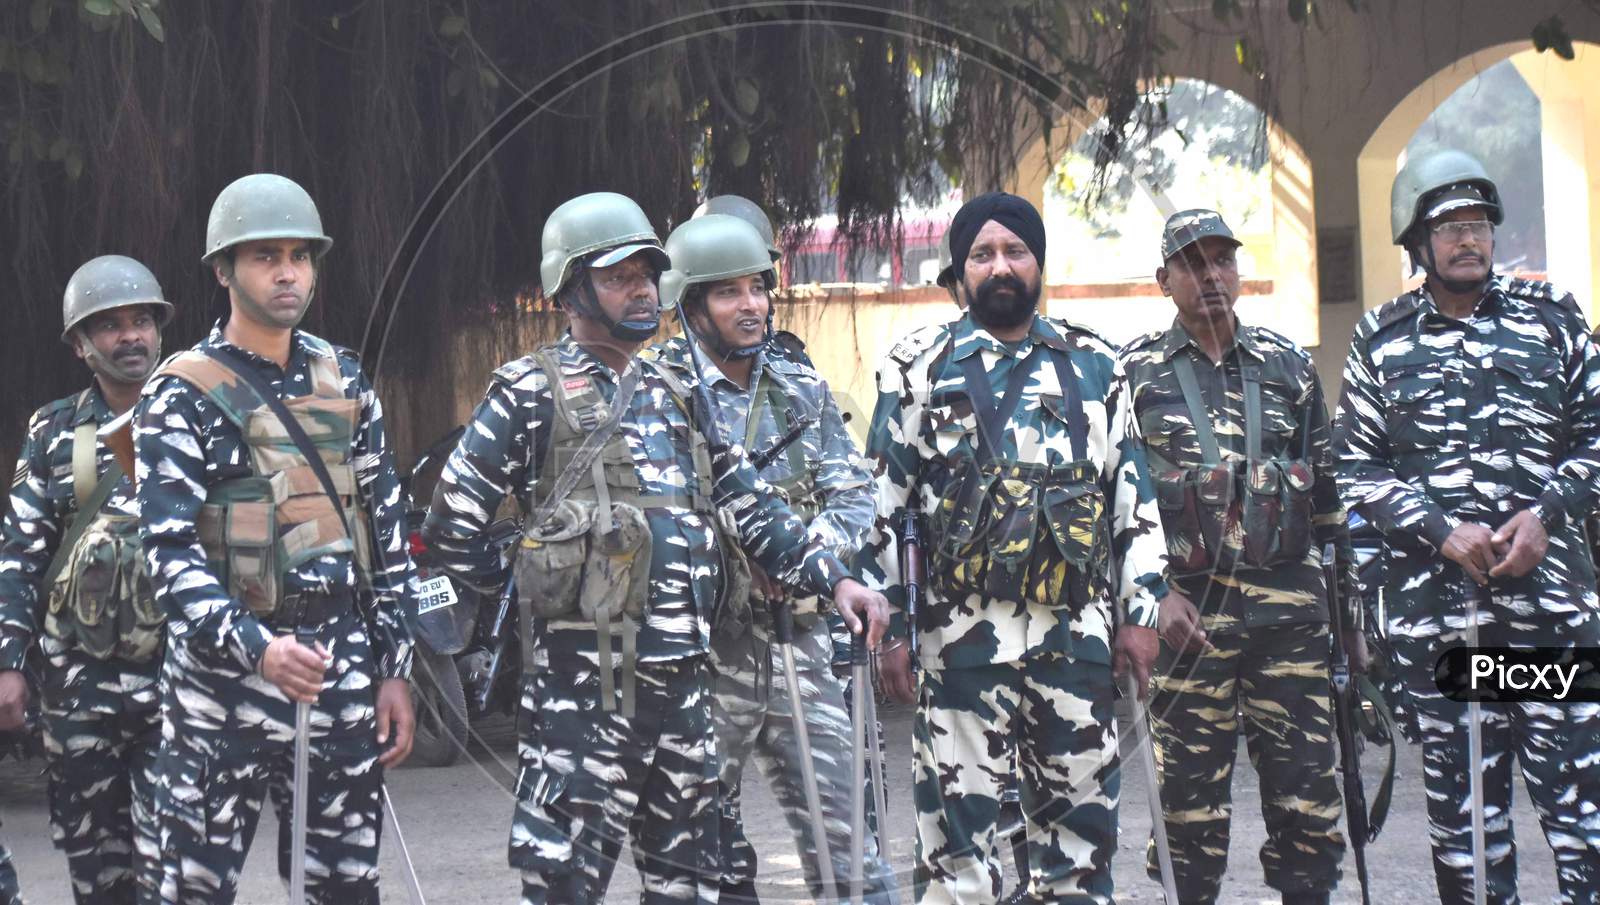 CRPF Police During Protests